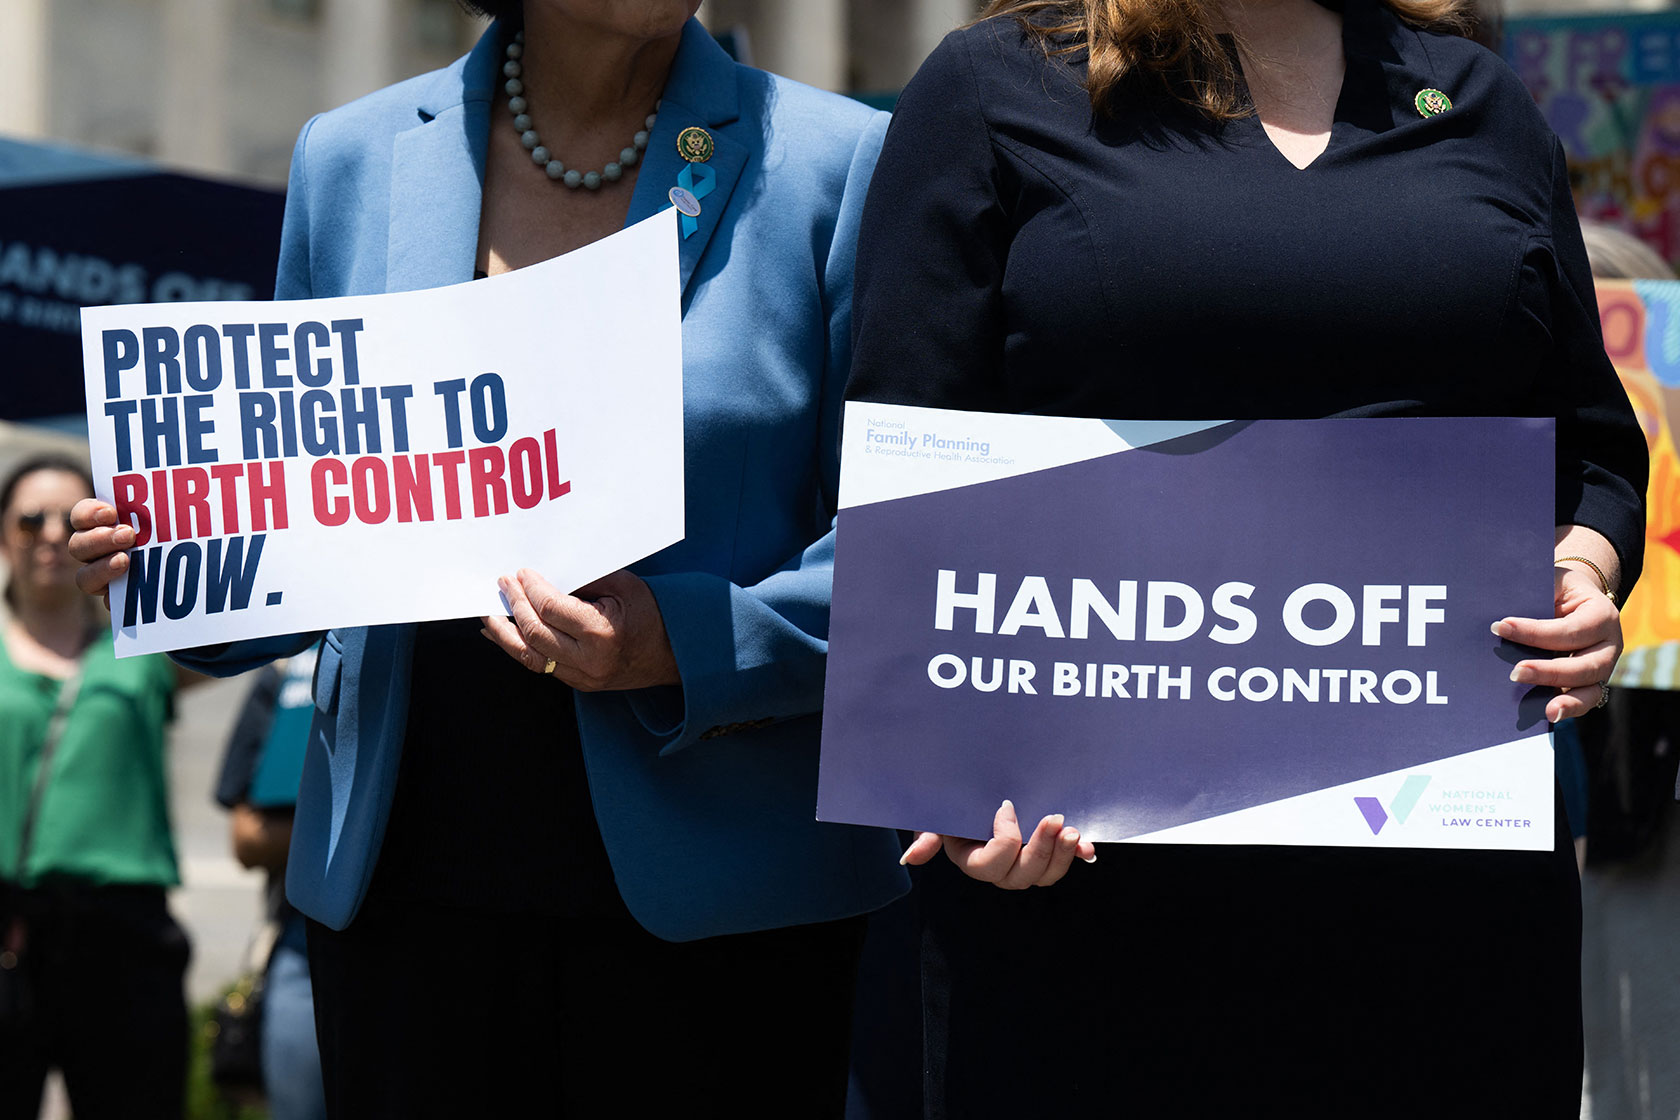 Members of Congress support legislation that would protect birth control access.